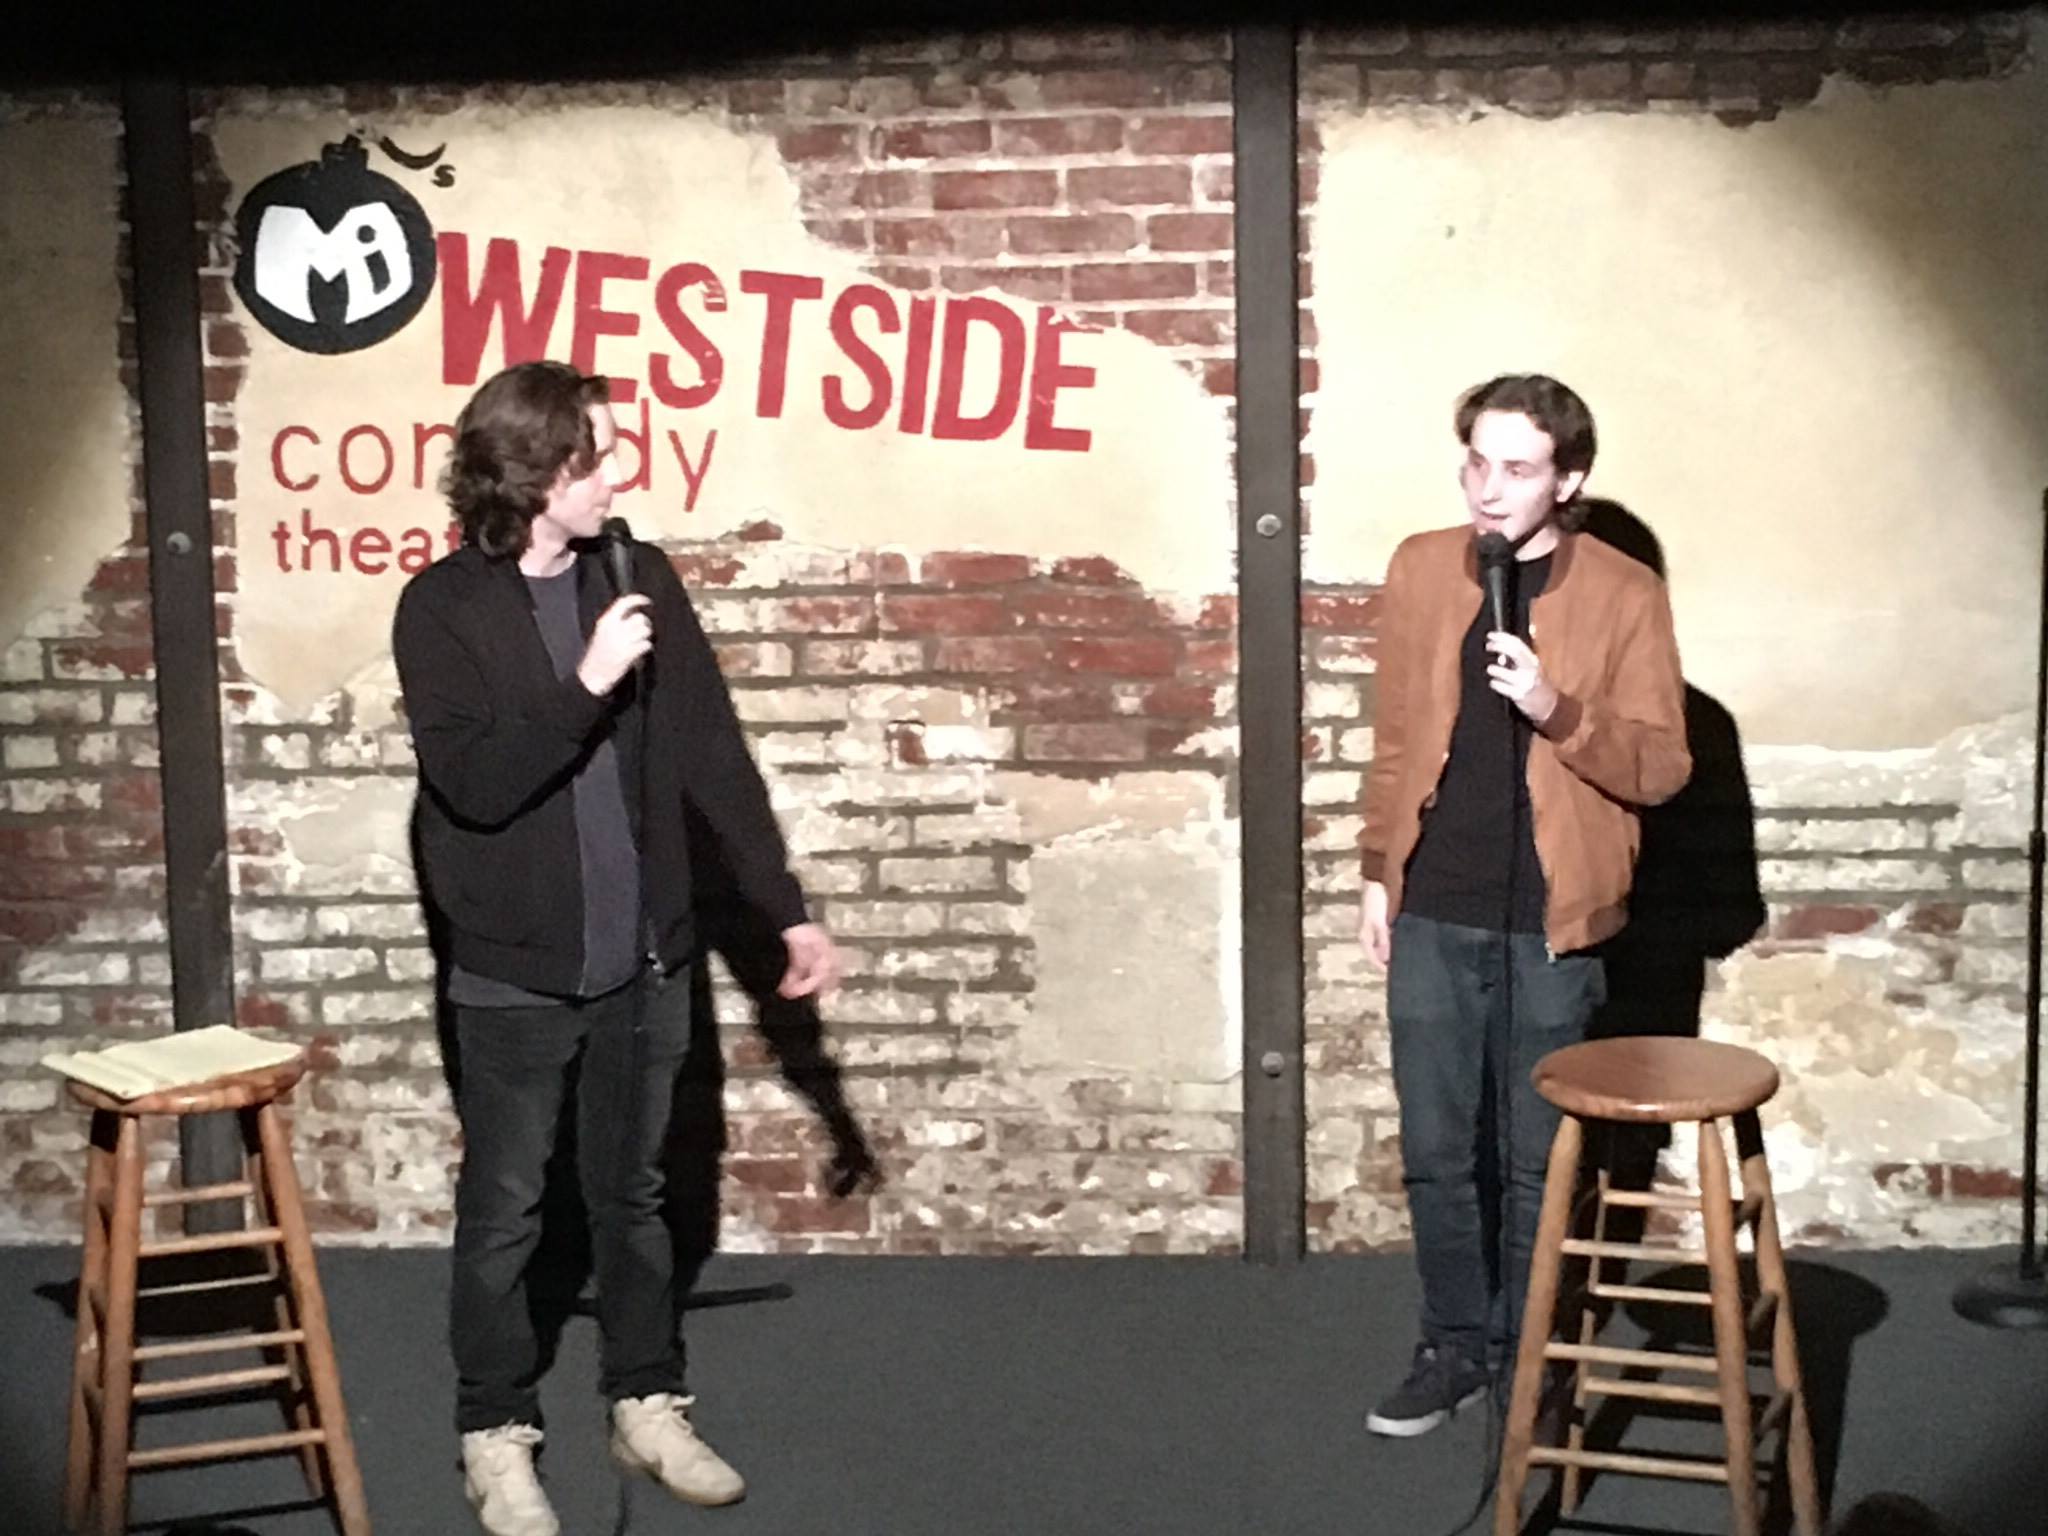 Dana Carvey's sons, Dex Carvey and Thomas Carvey, performing together at M.i.'s Westside Comedy Theater in 2016